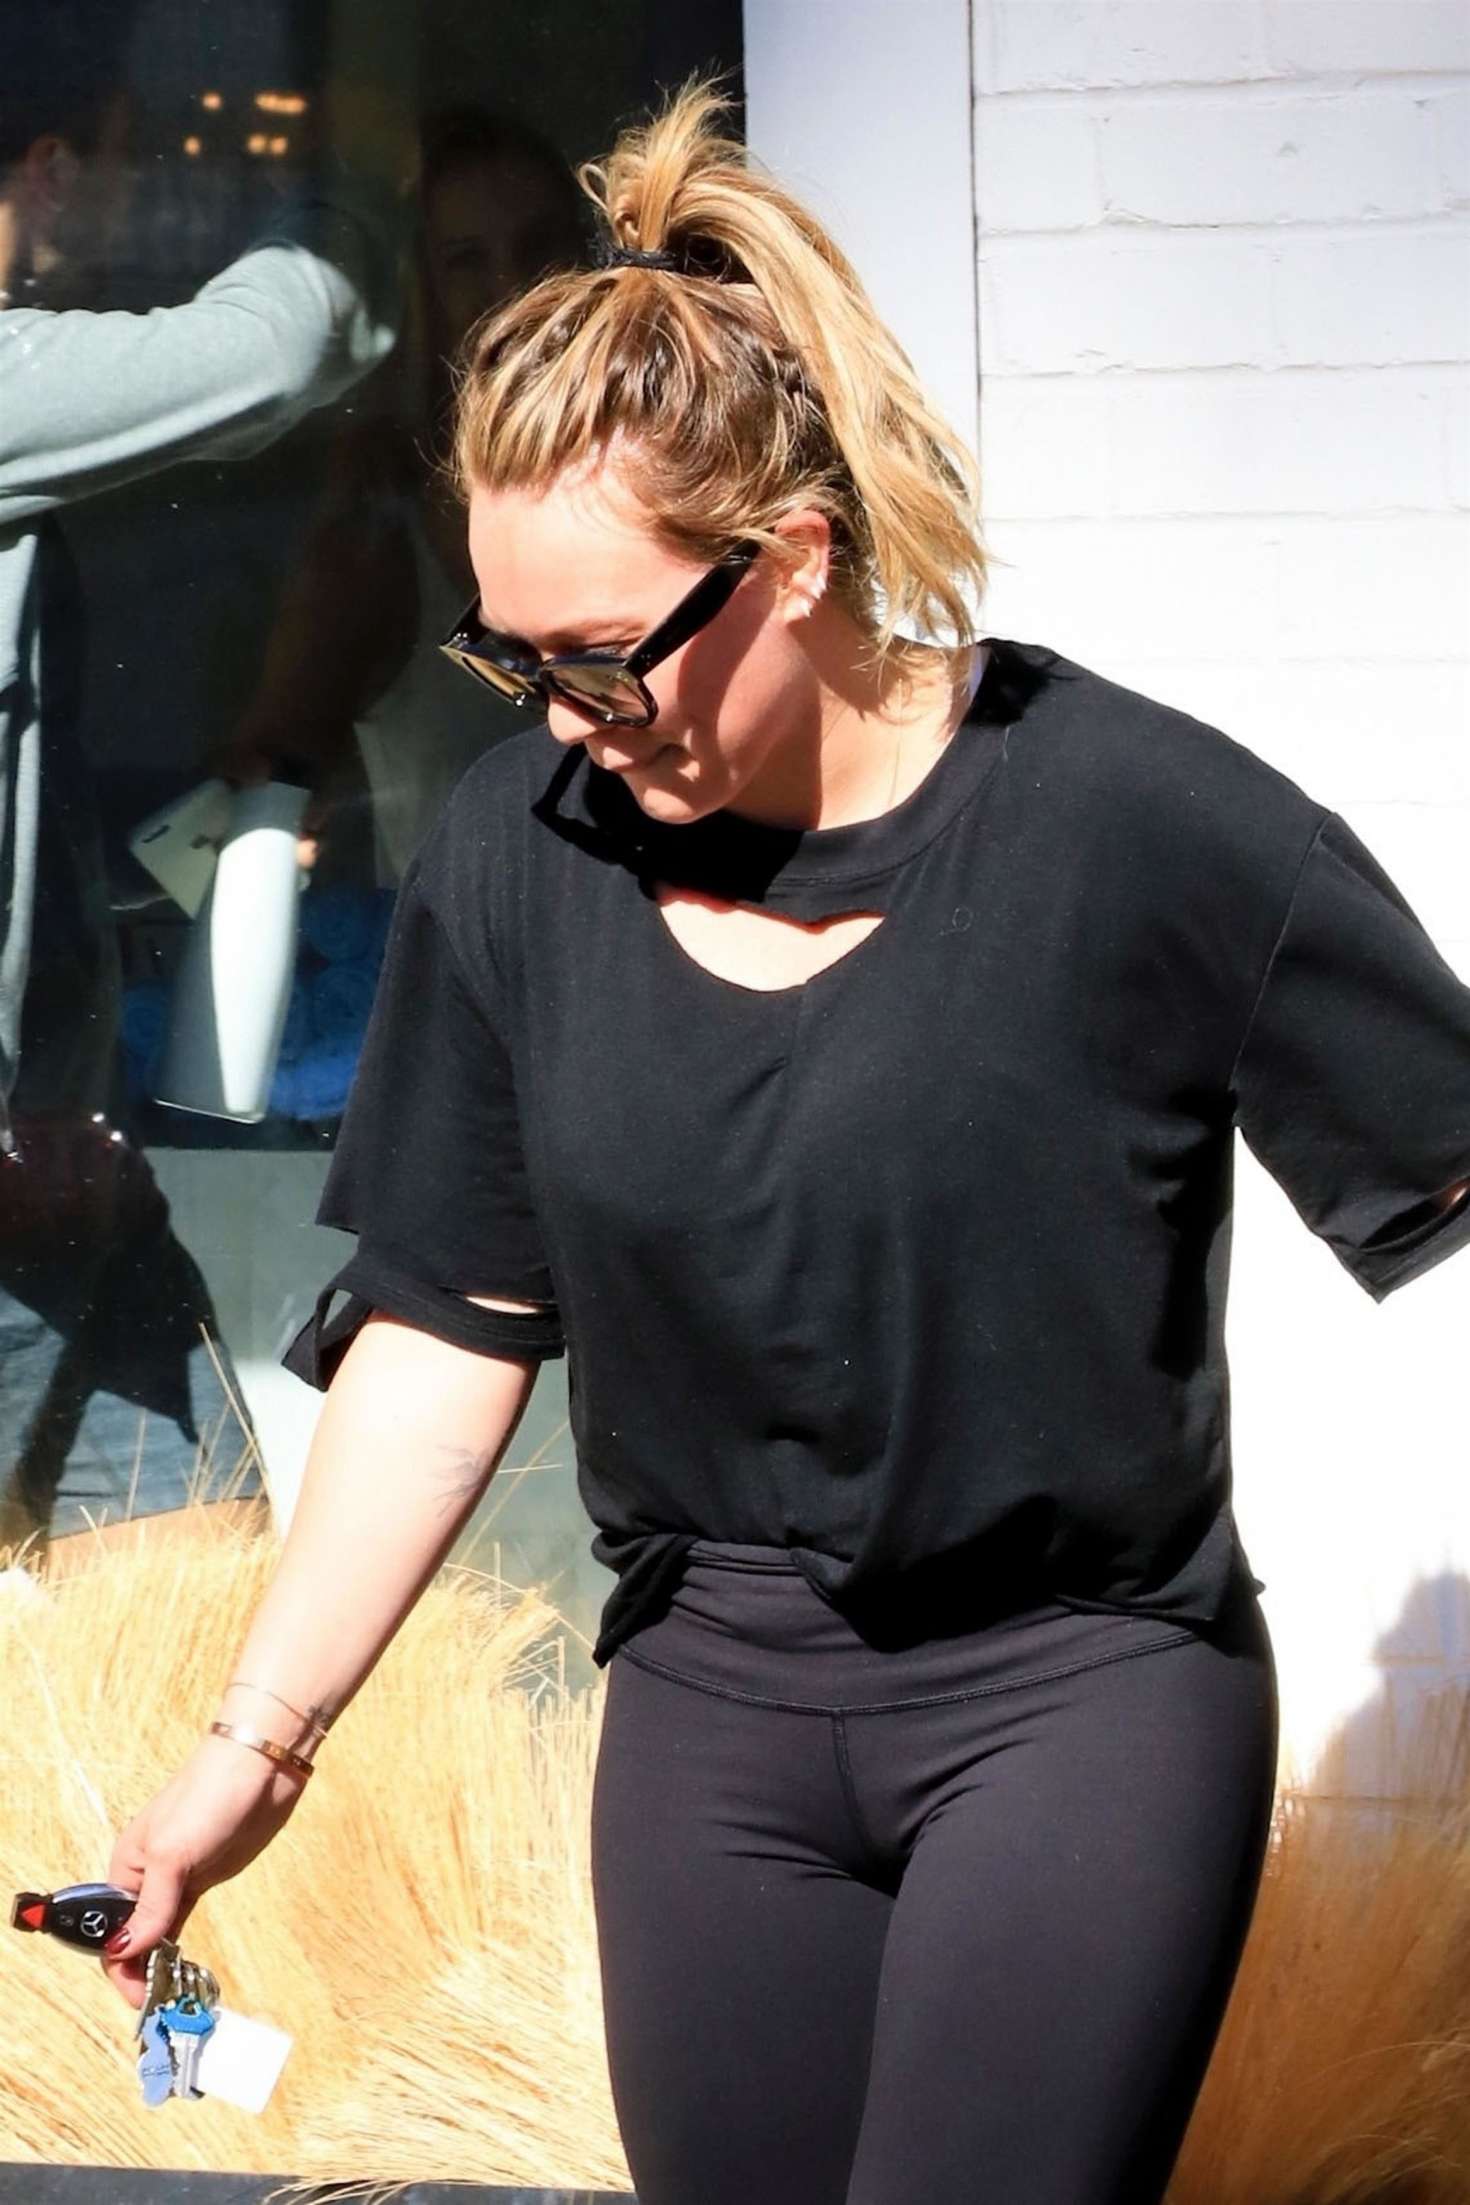 Hilary Duff in Tights - Hits the gym in Studio City